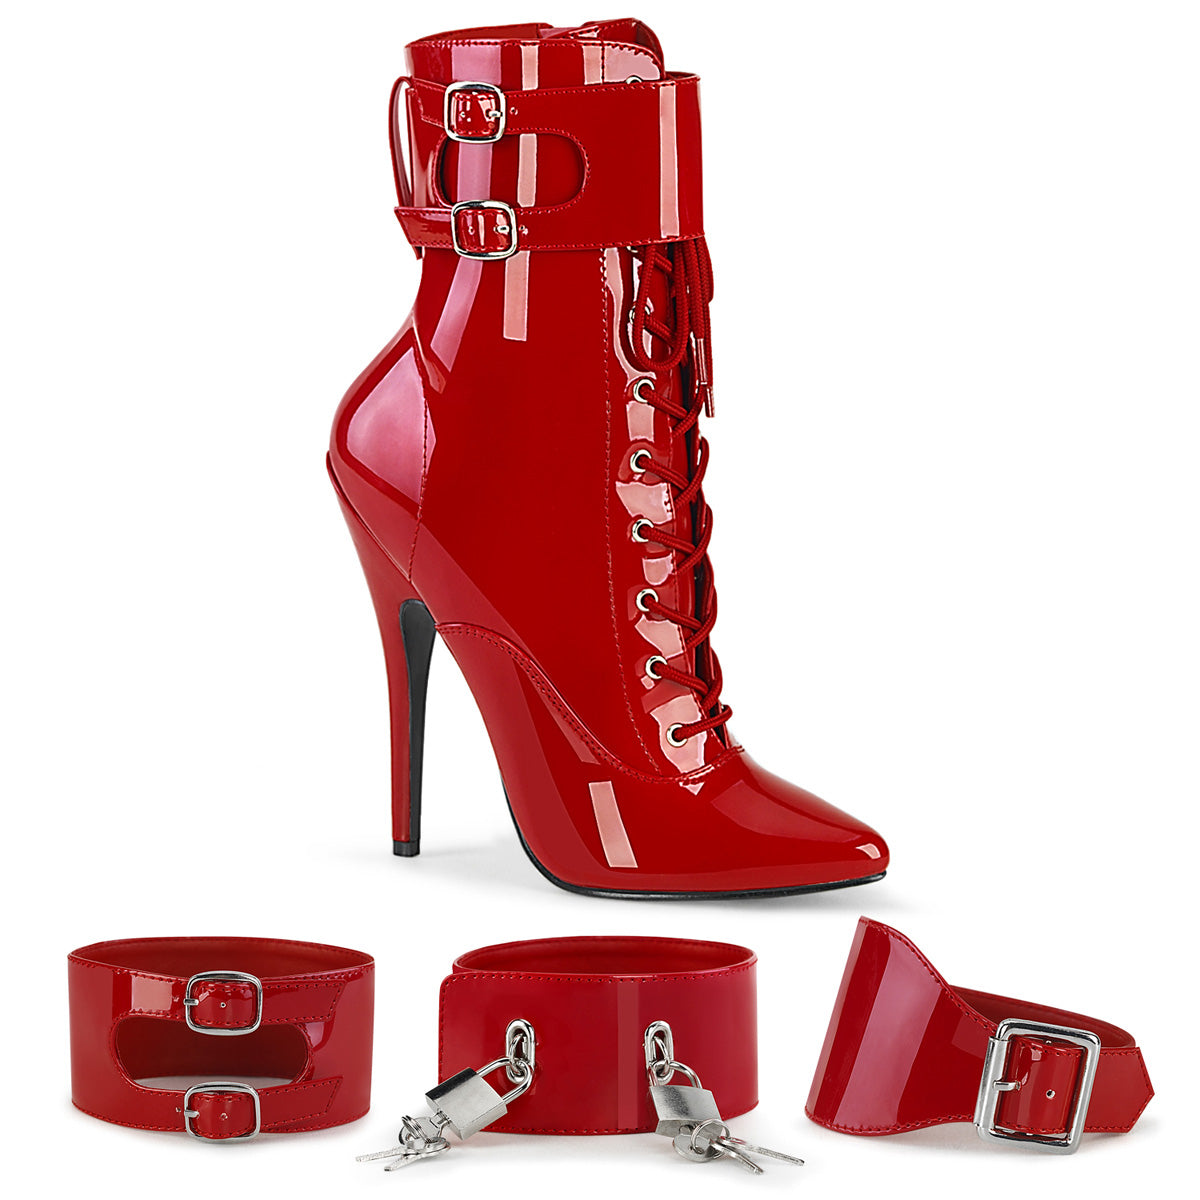 DOMINA-1023 Red Ankle Boots